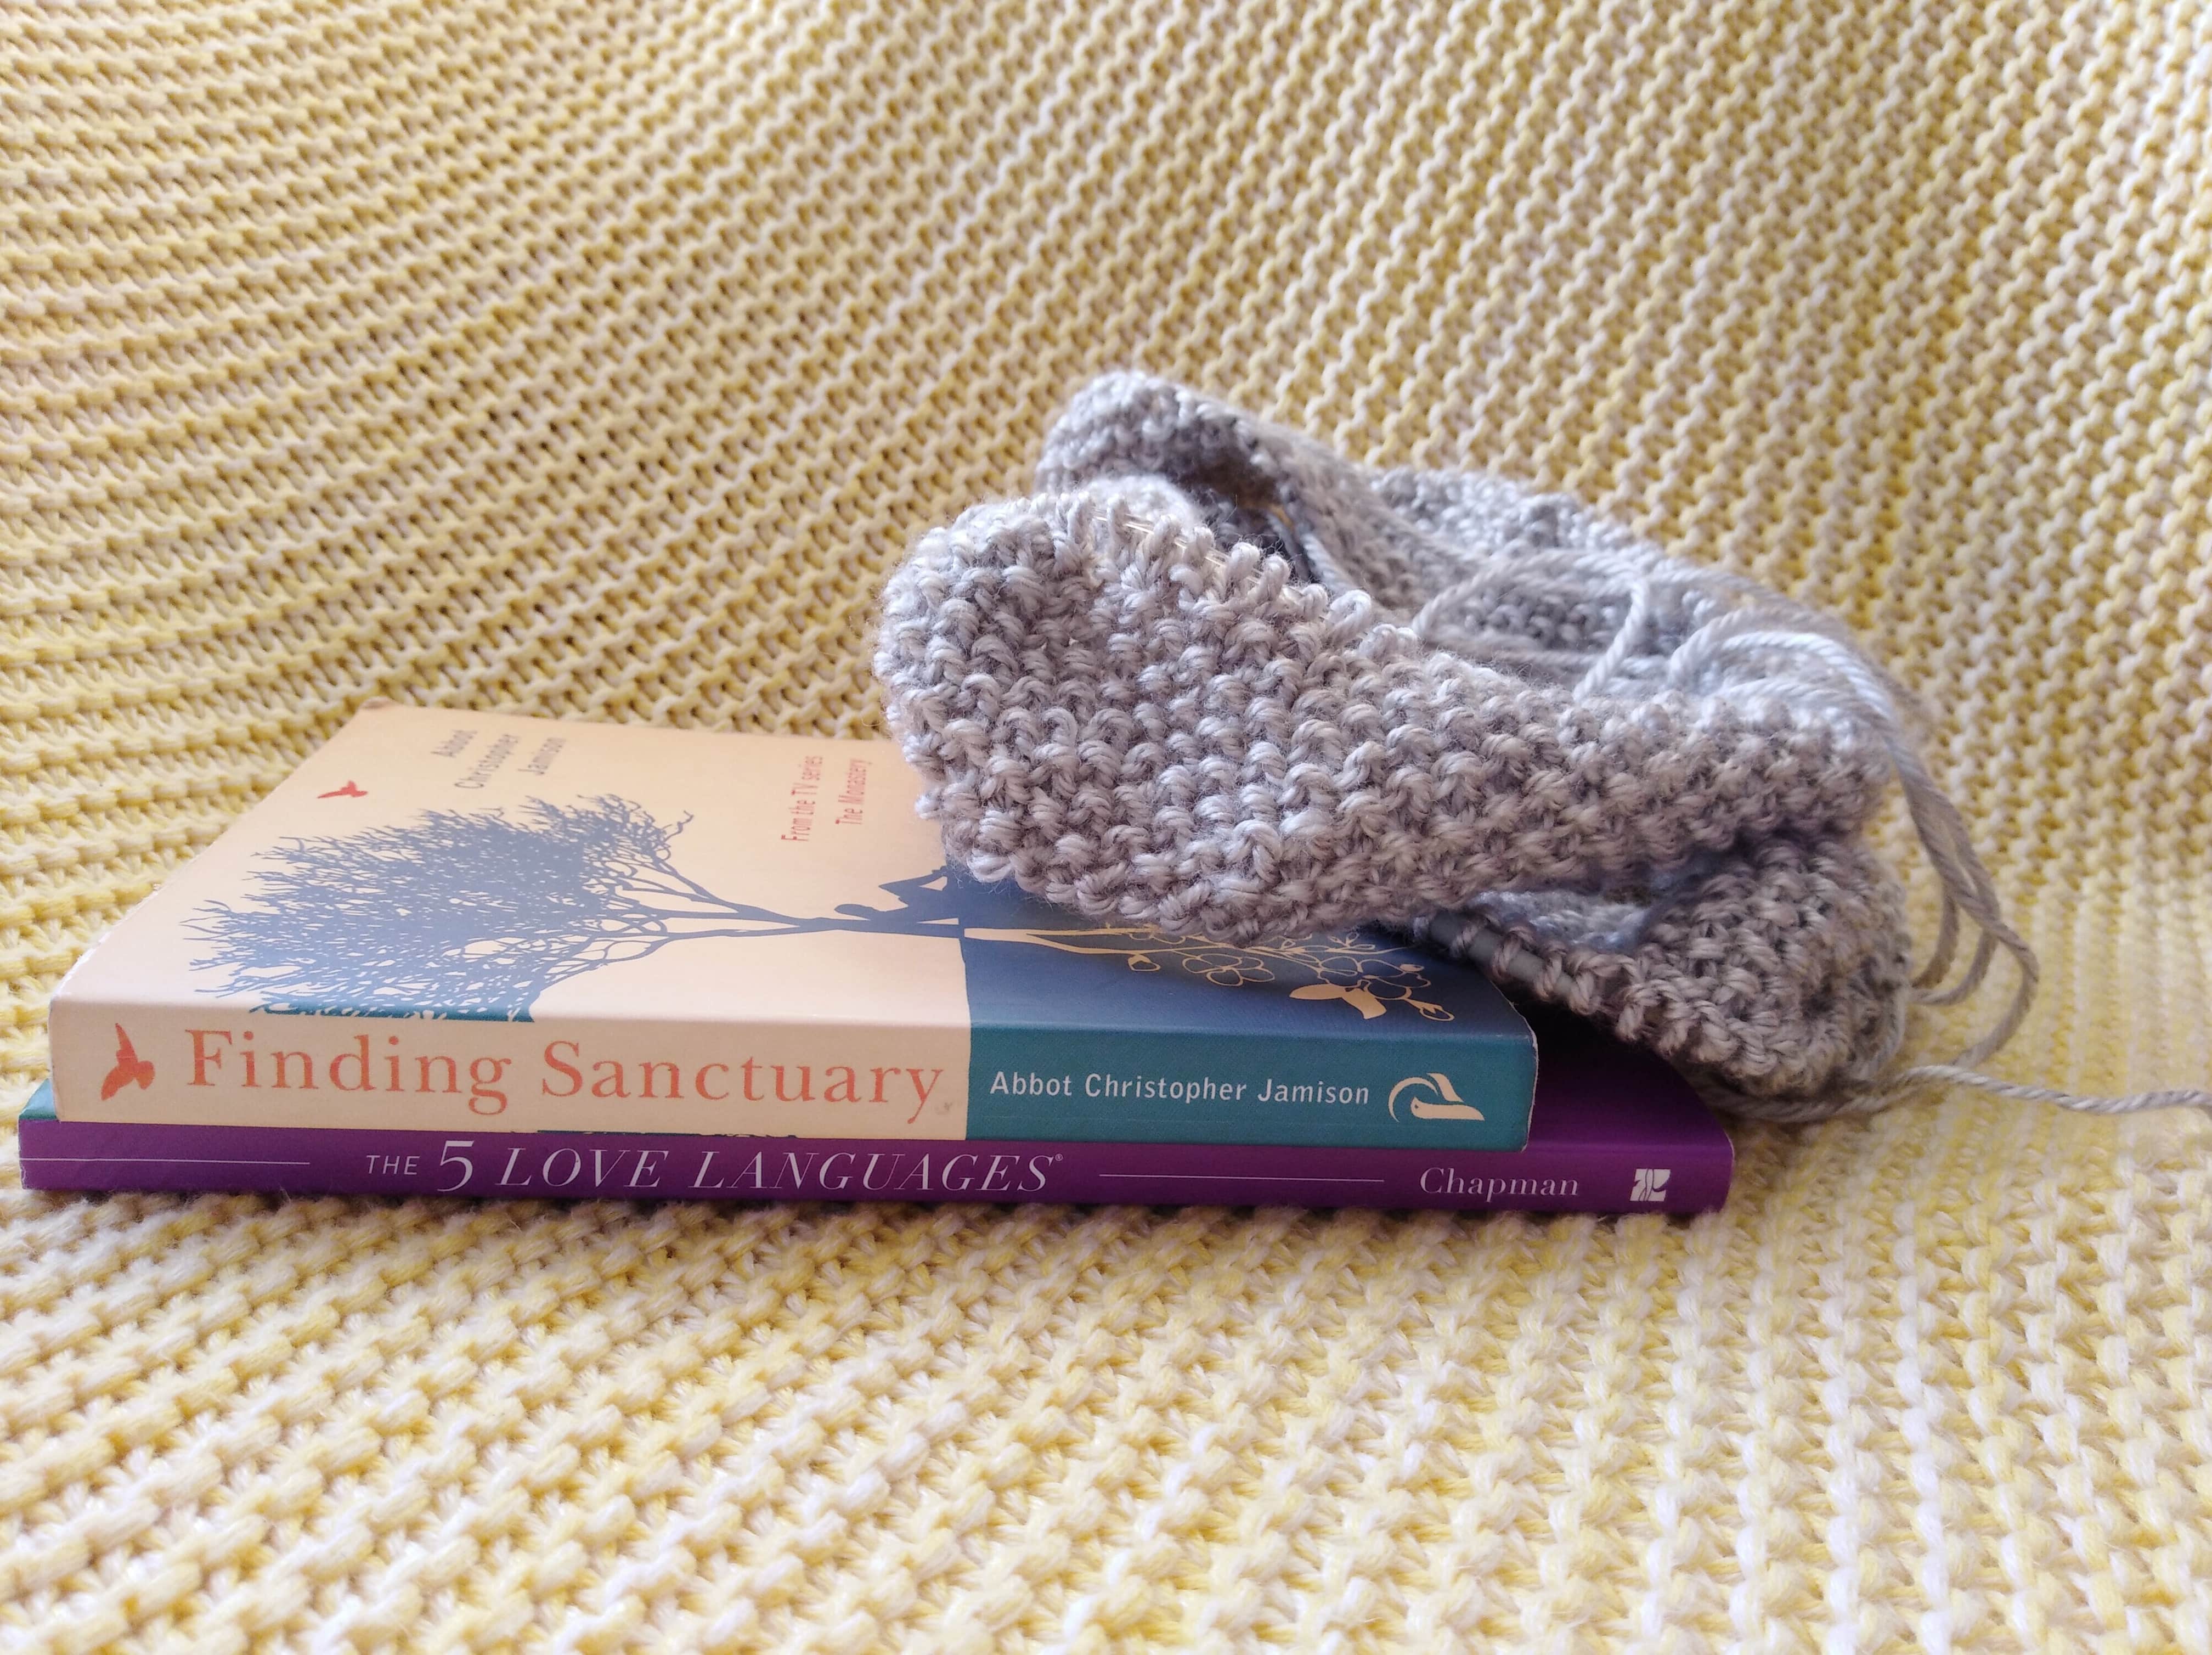 Image of knitting in progress and two books